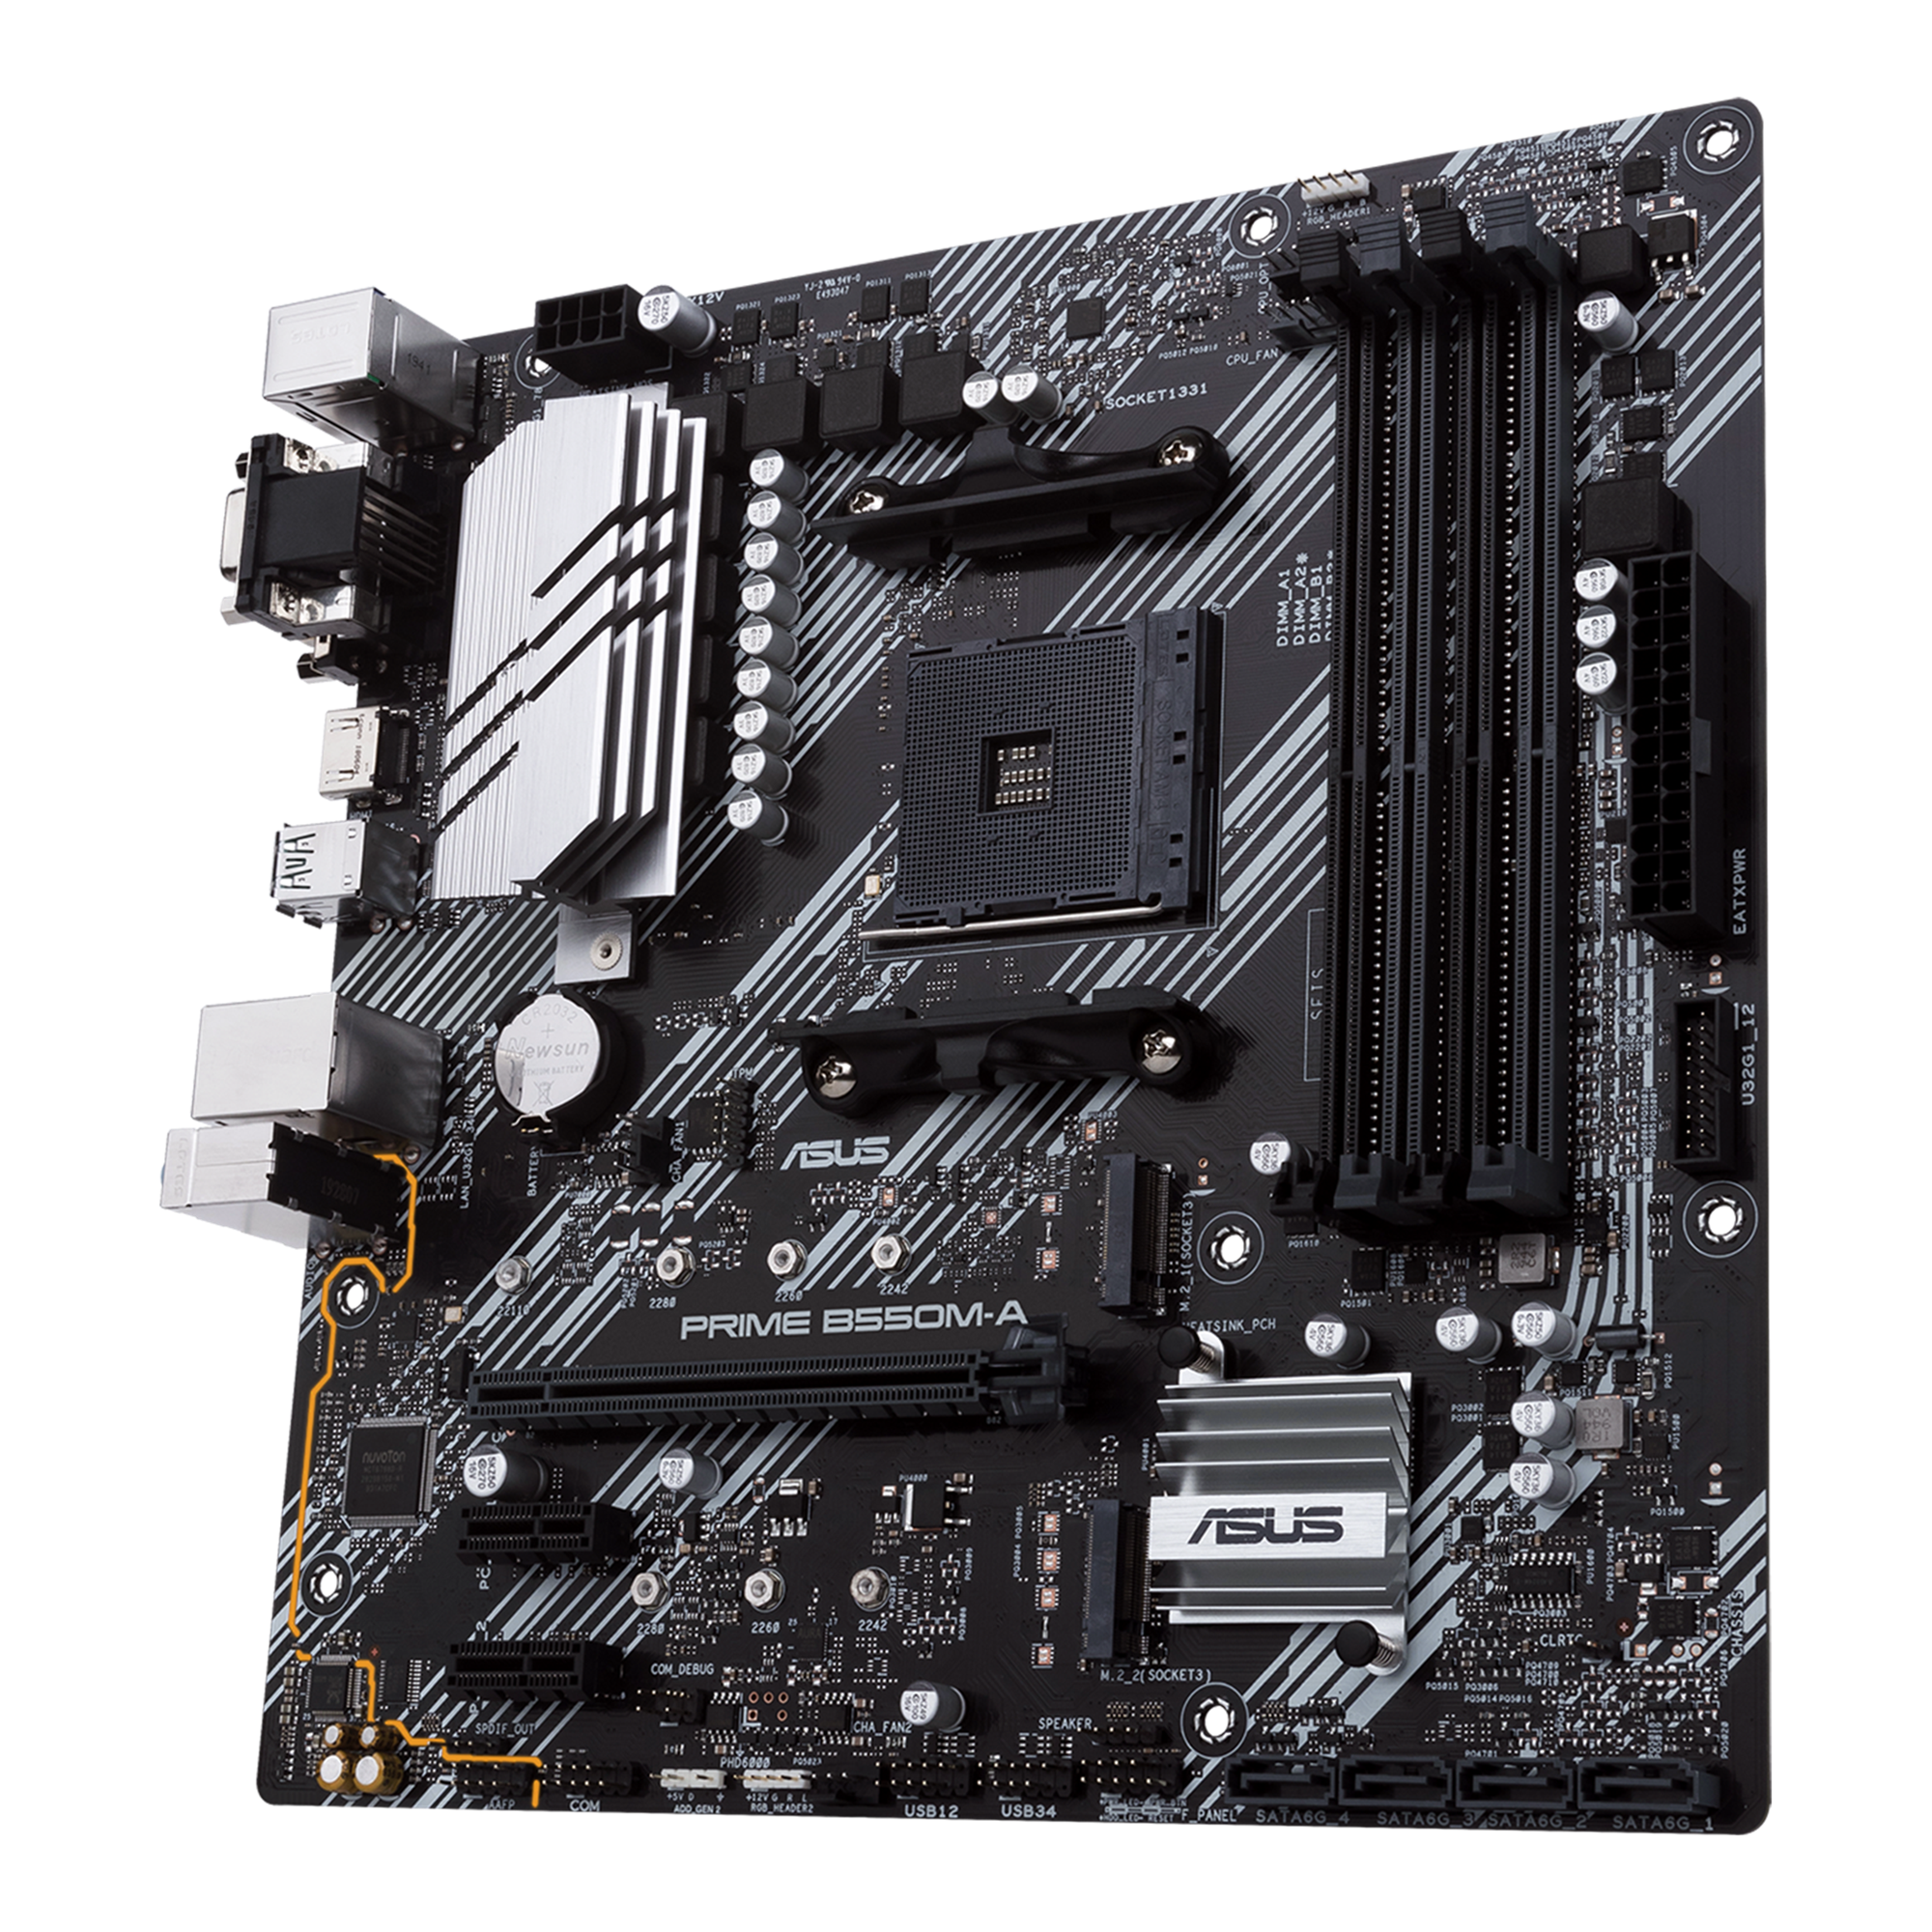 PRIME B550M-A｜Motherboards｜ASUS USA